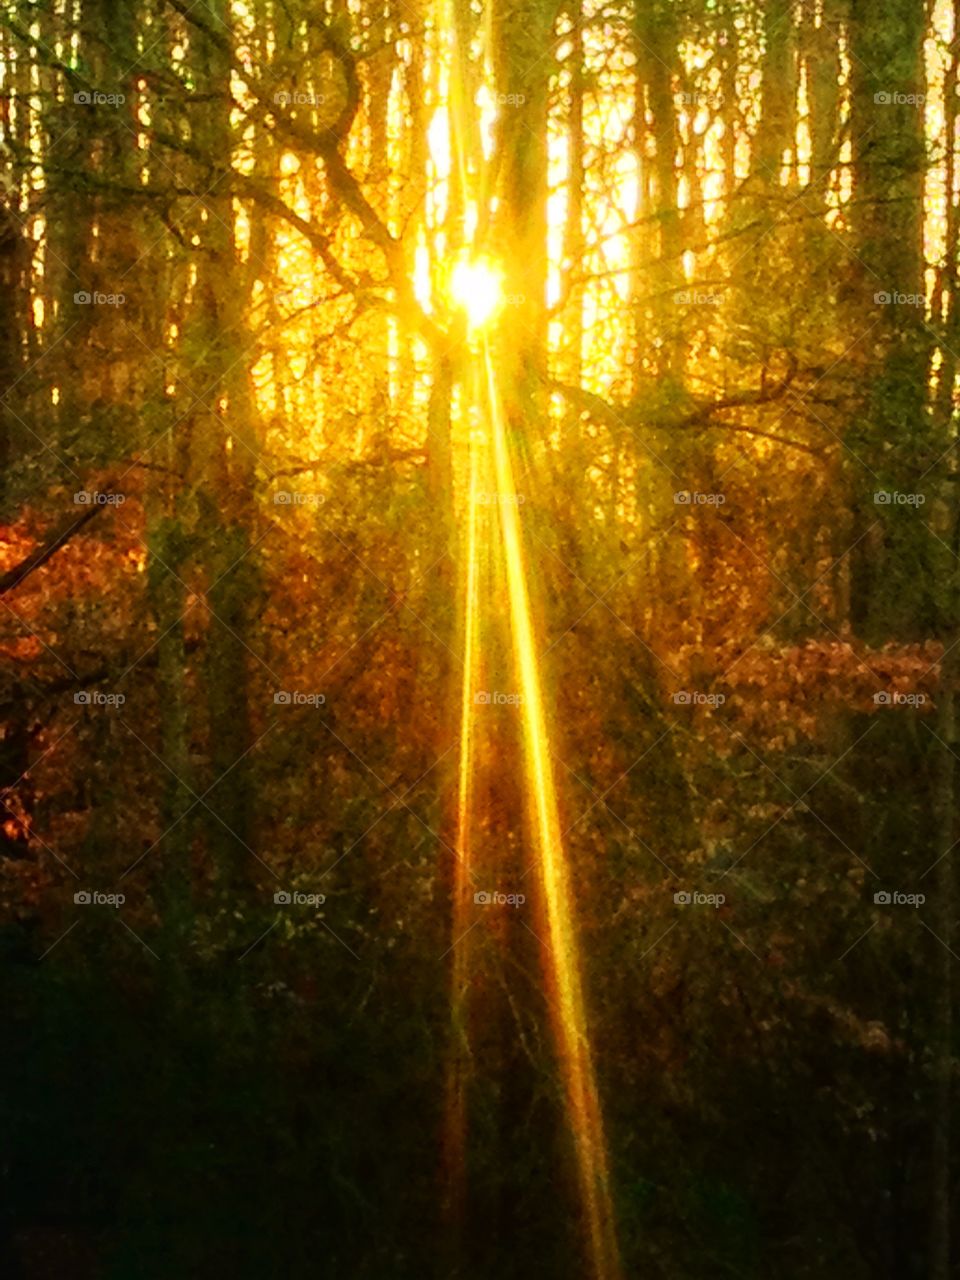 Morning Sunshine glowing through the forest 